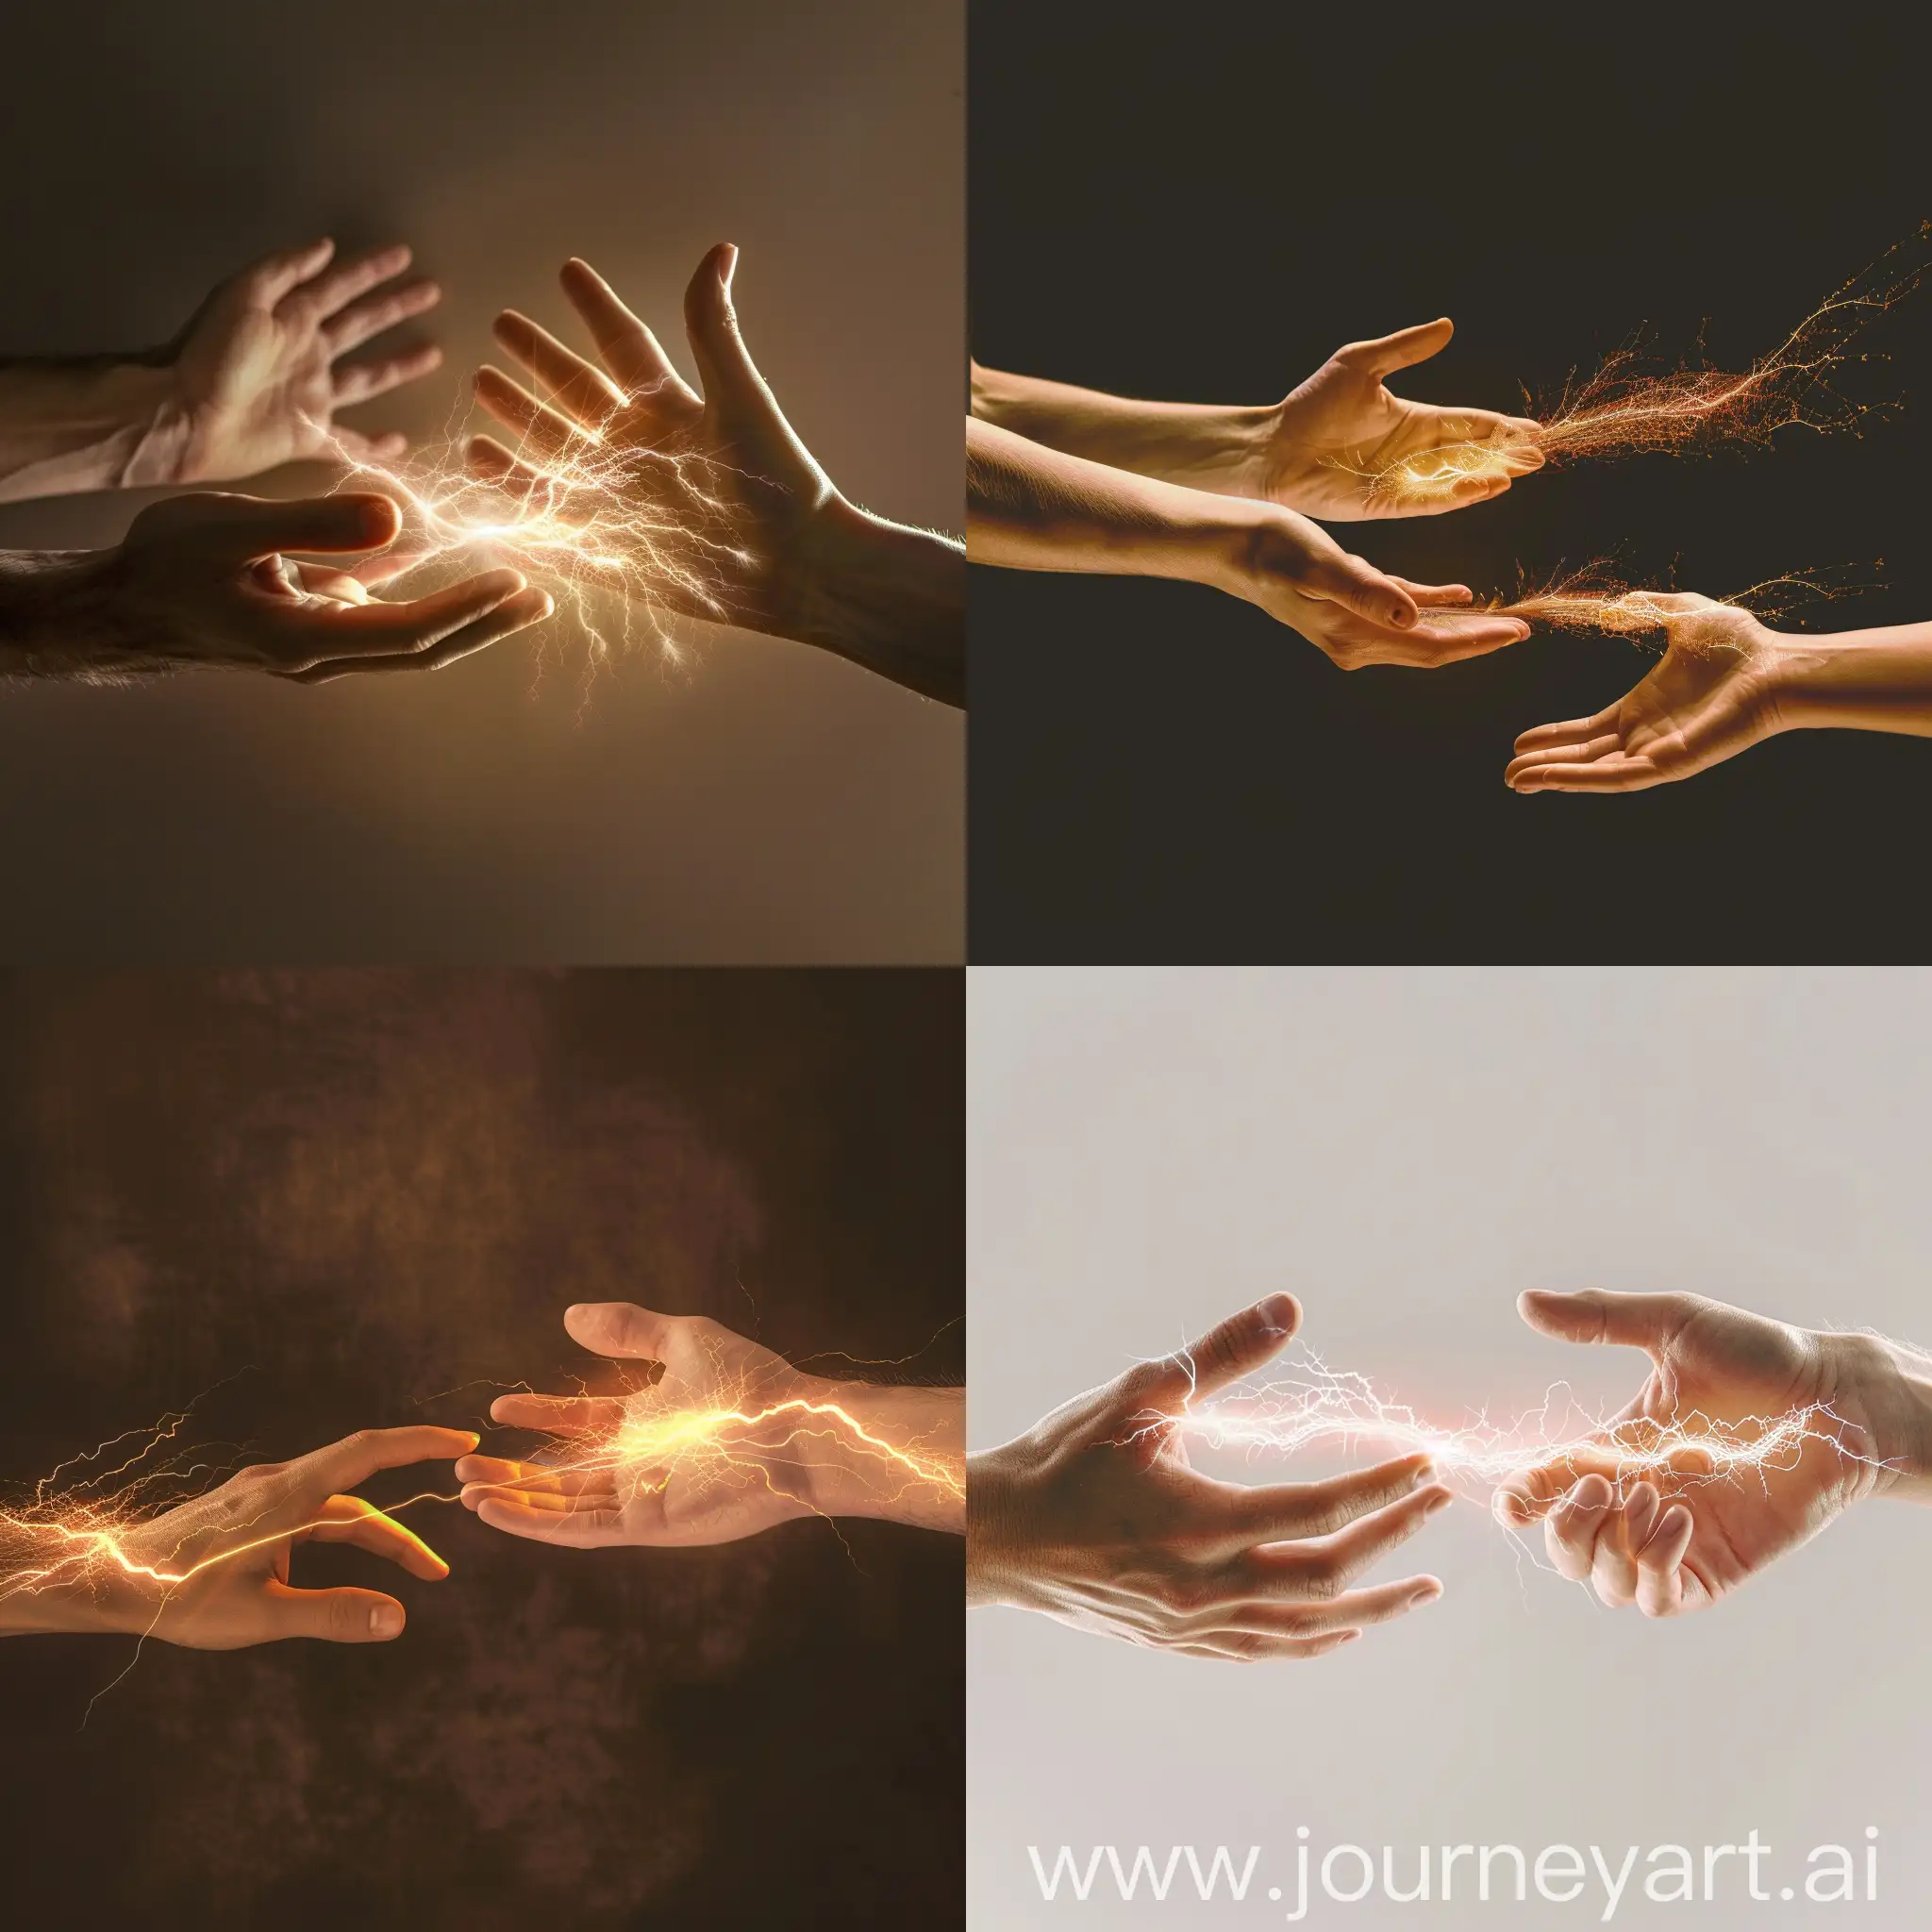 two hands reaching to greet each other with a pulse of energy flowing through them toward each other